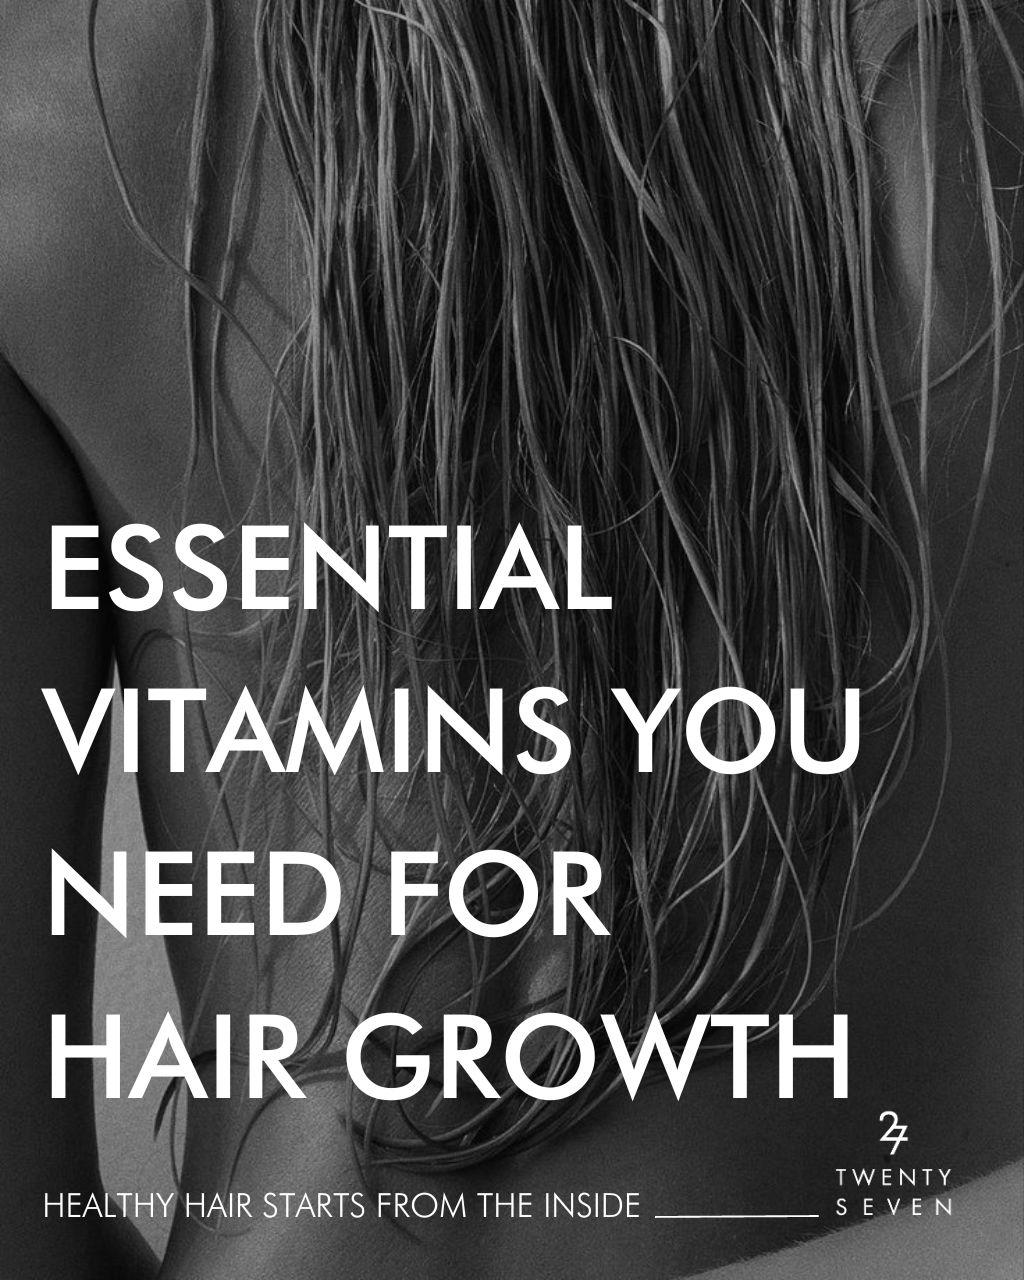 Essential Vitamins You Need for Hair Growth